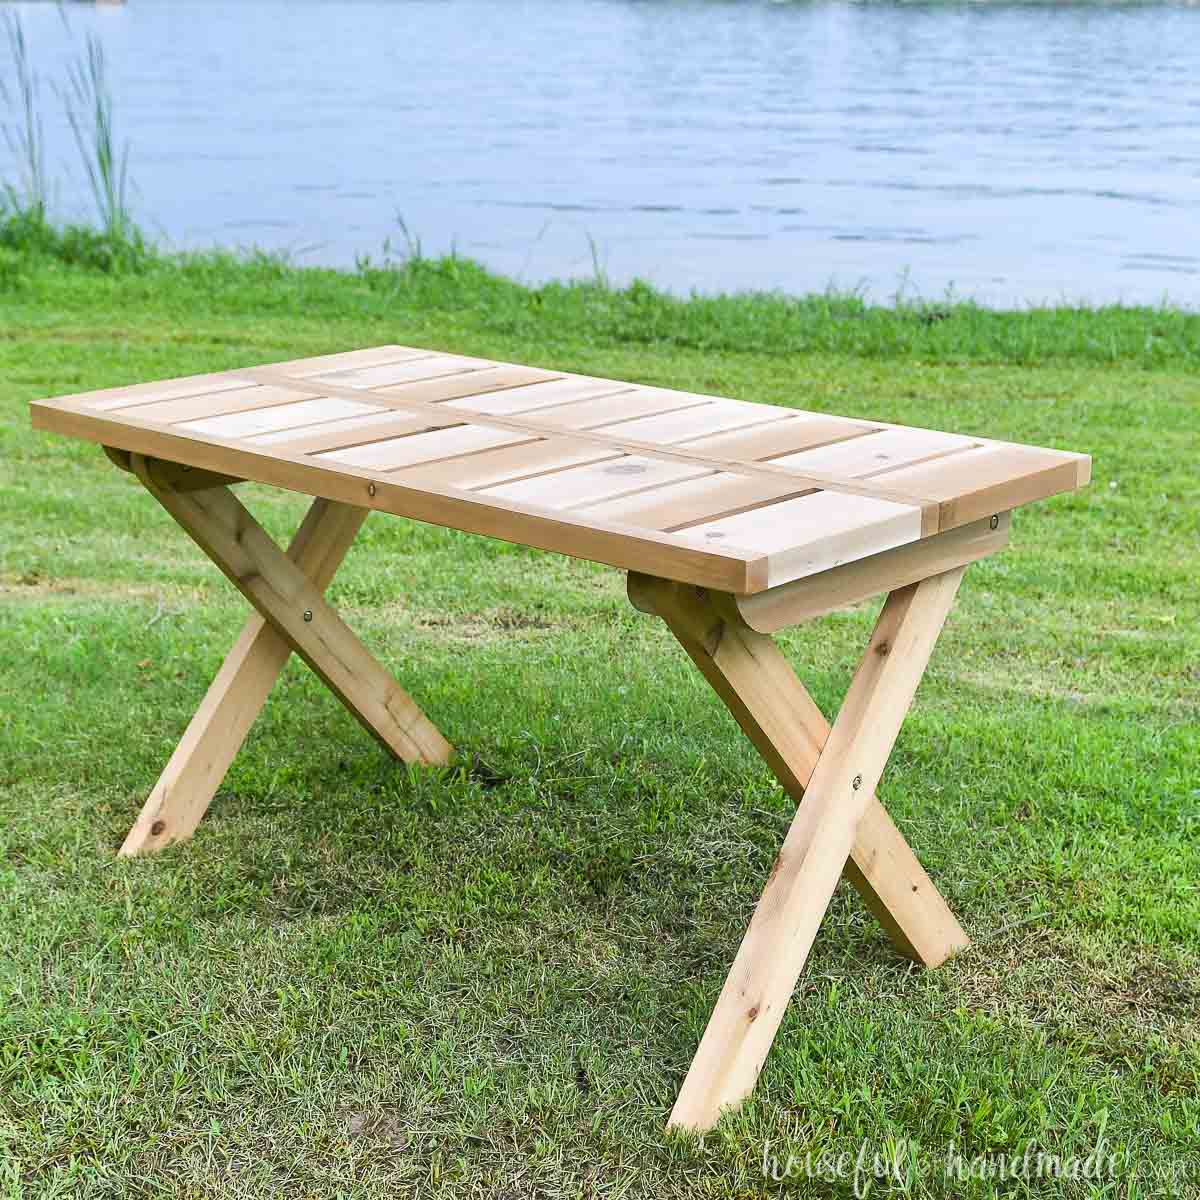 PICNIC TABLE & Folding Garden Chair How-To build PLANS 